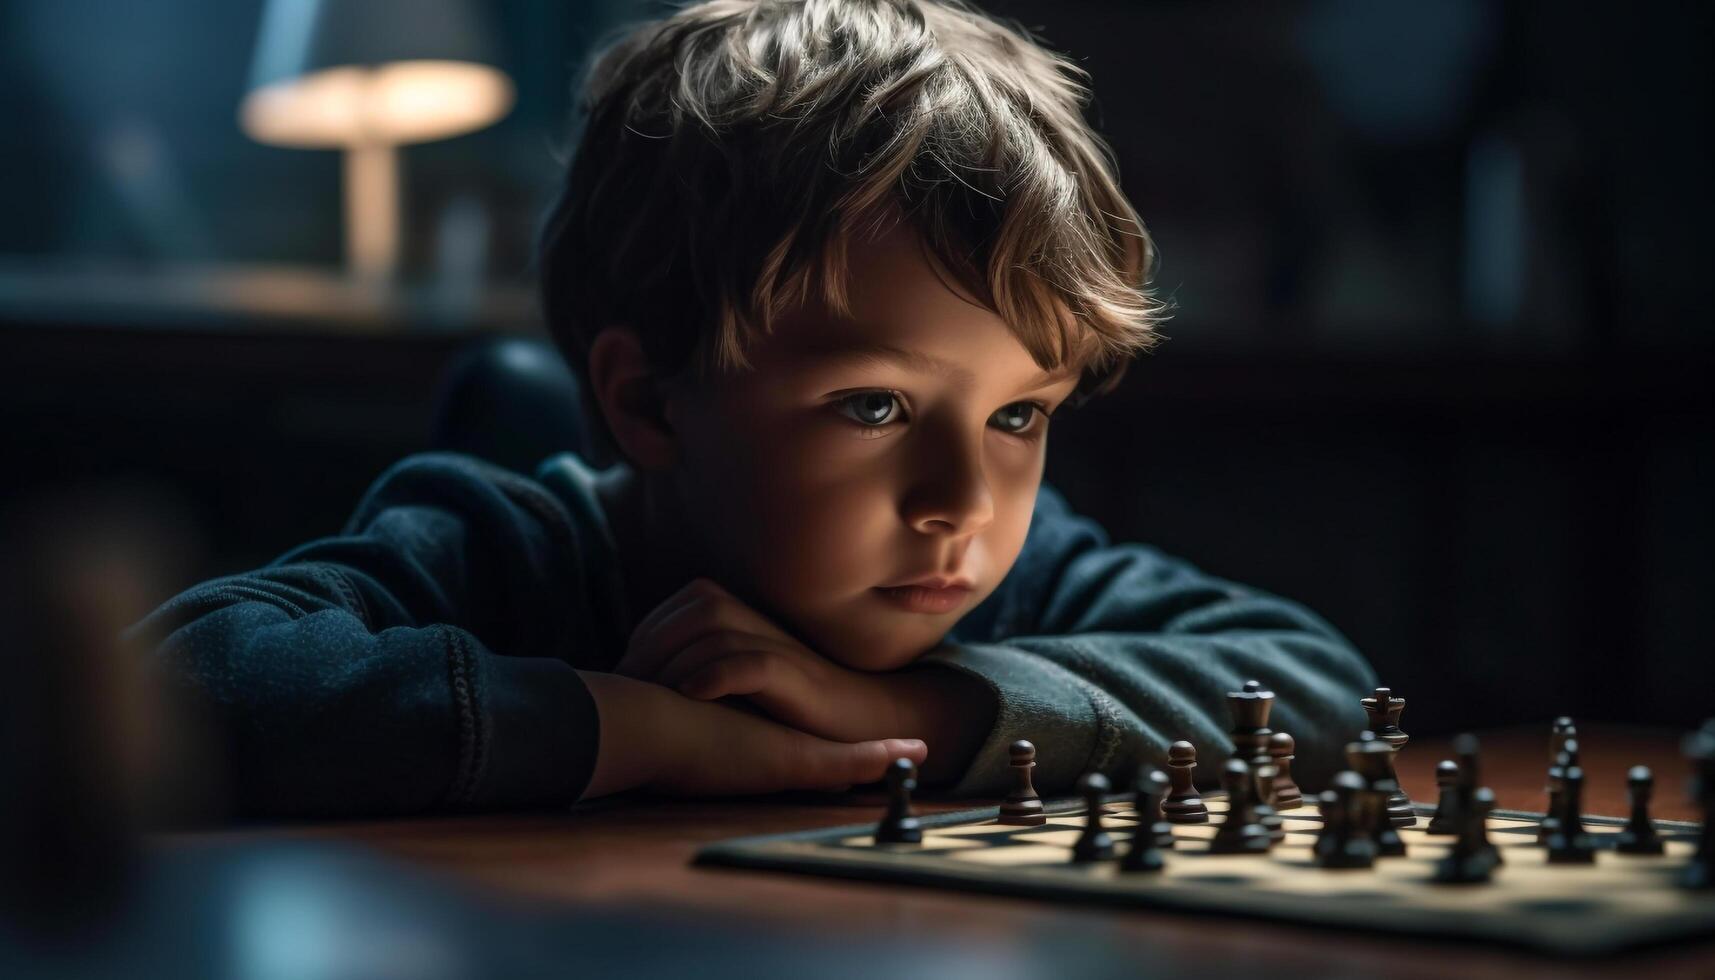 Cute Caucasian boys playing chess with concentration indoors at night generated by AI photo